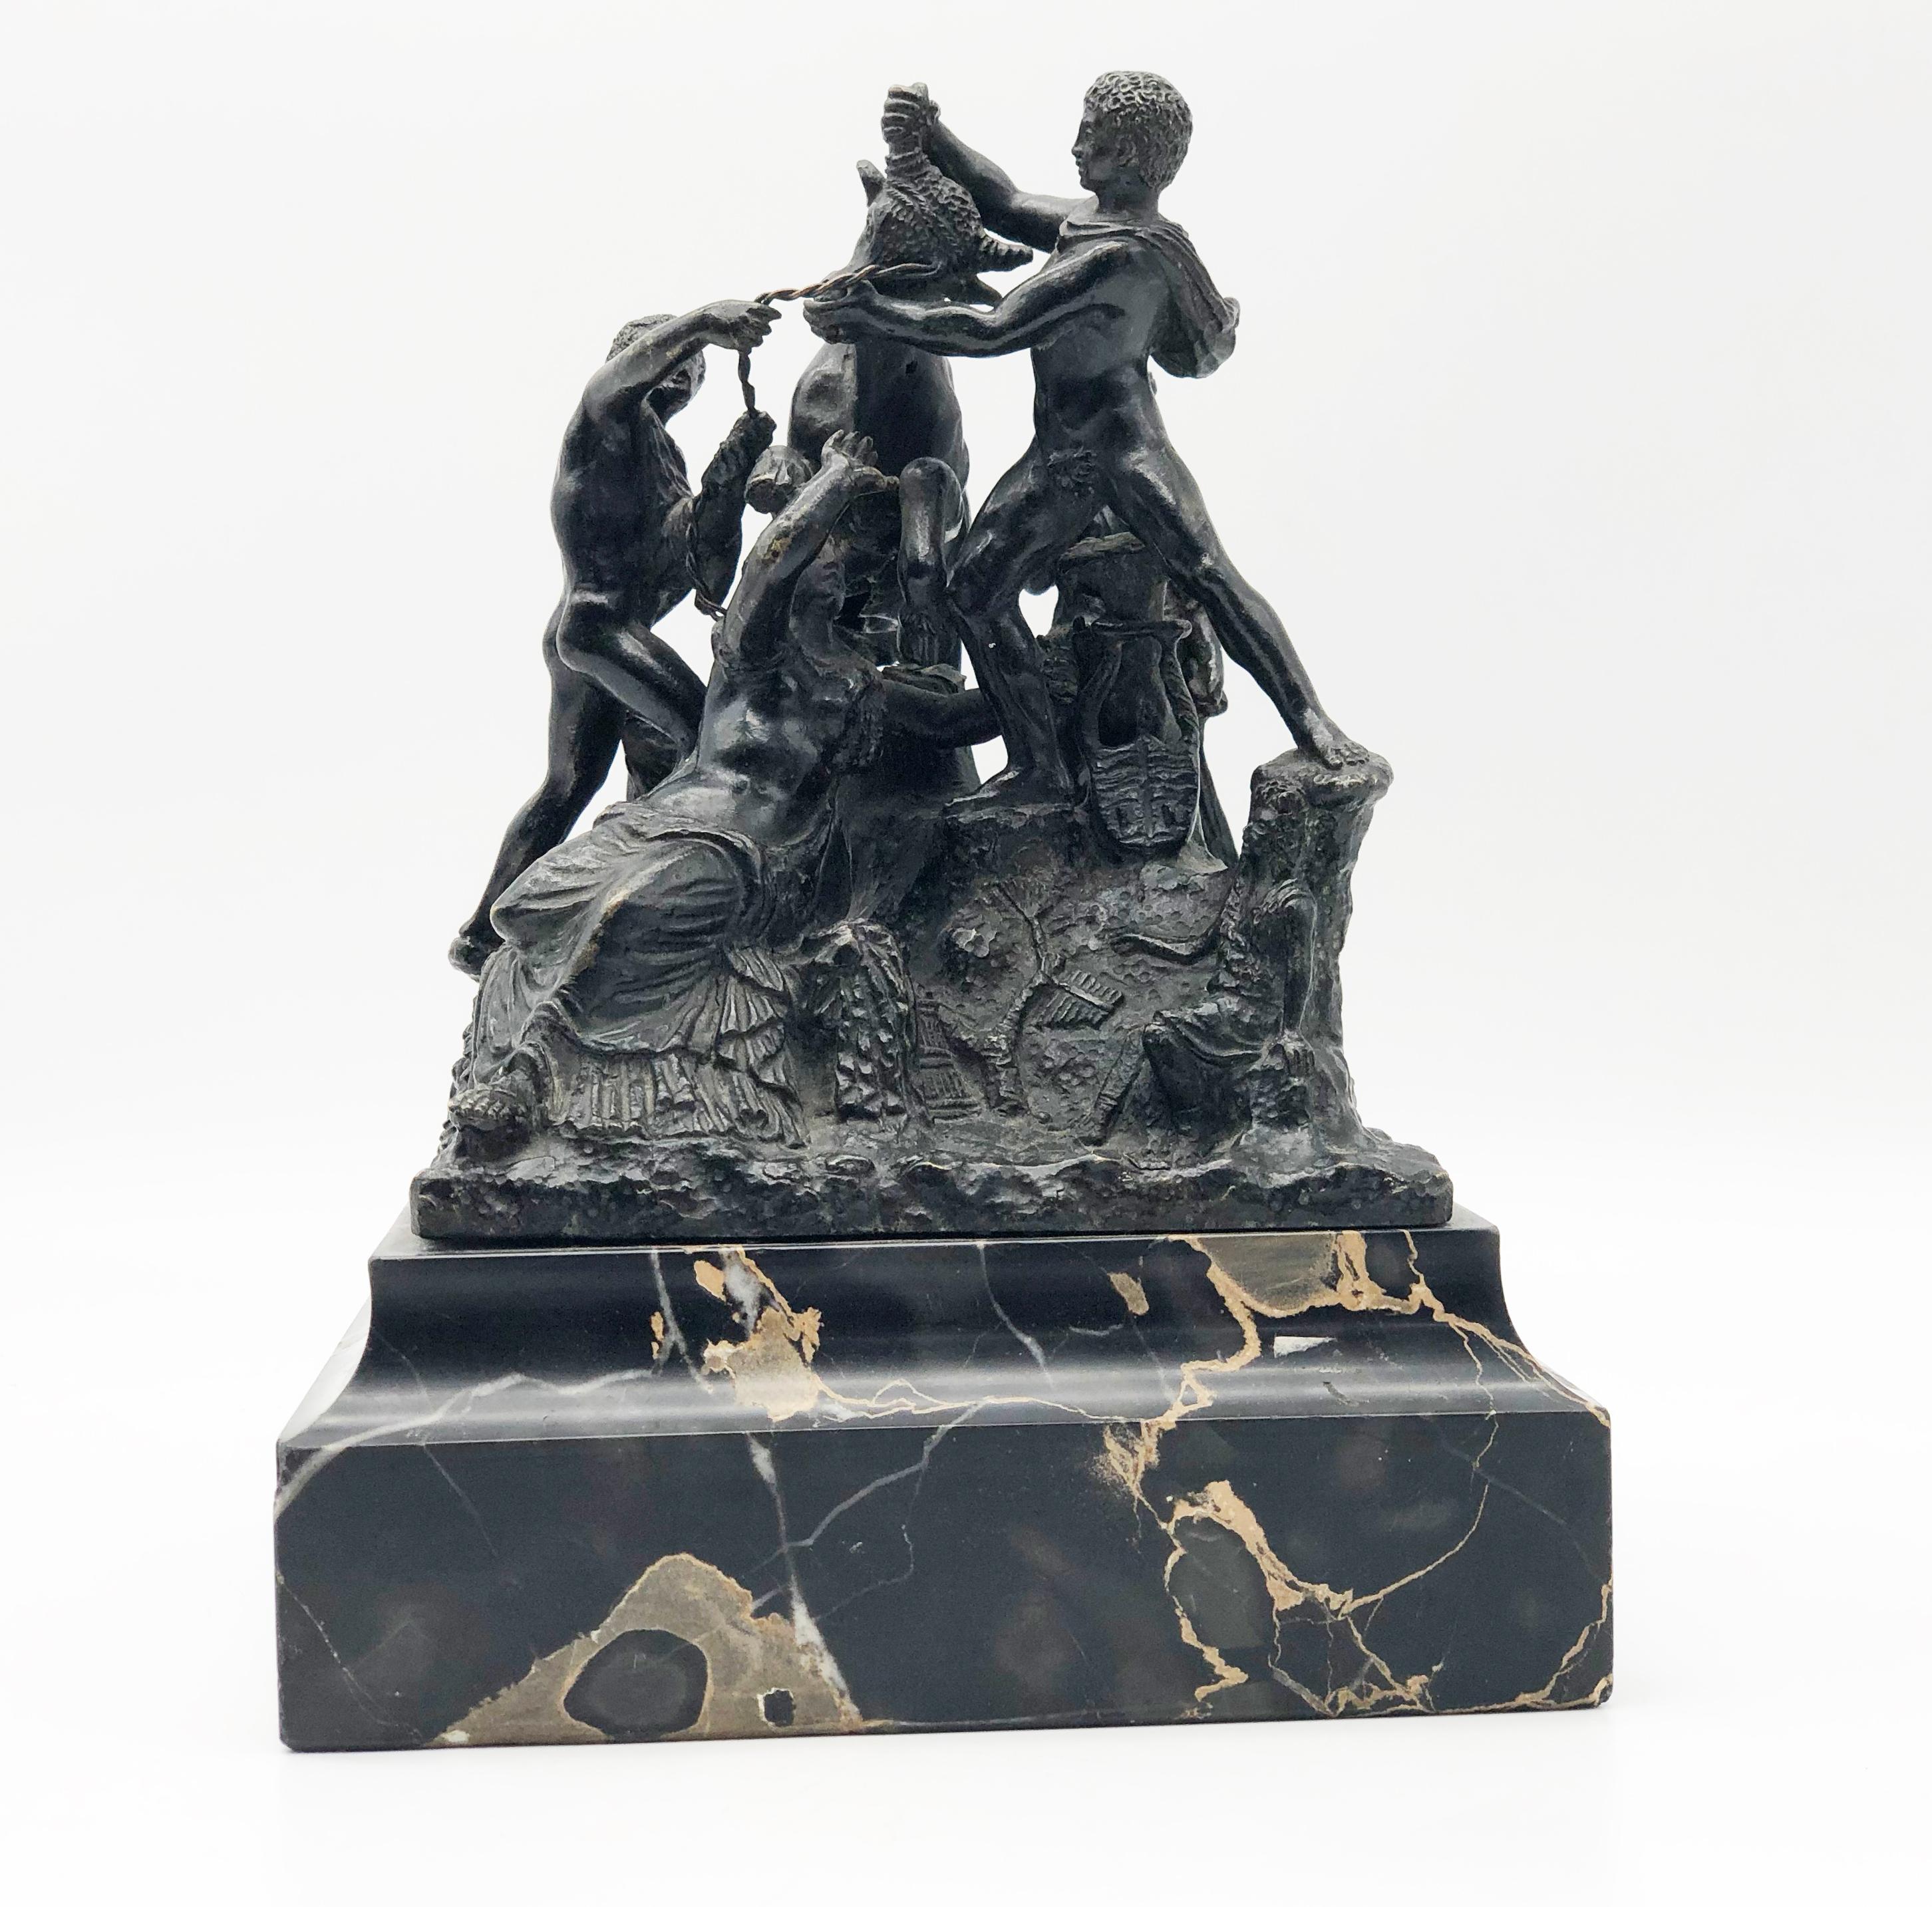 This is a scale sculpture after the antique made by Luigi Righetti a famous and important roman sculptor, of the famous roman Farnese Bull, formerly in the Farnese collection in Rome. Sculptor, goldsmith and bronze worker, Righetti trained with